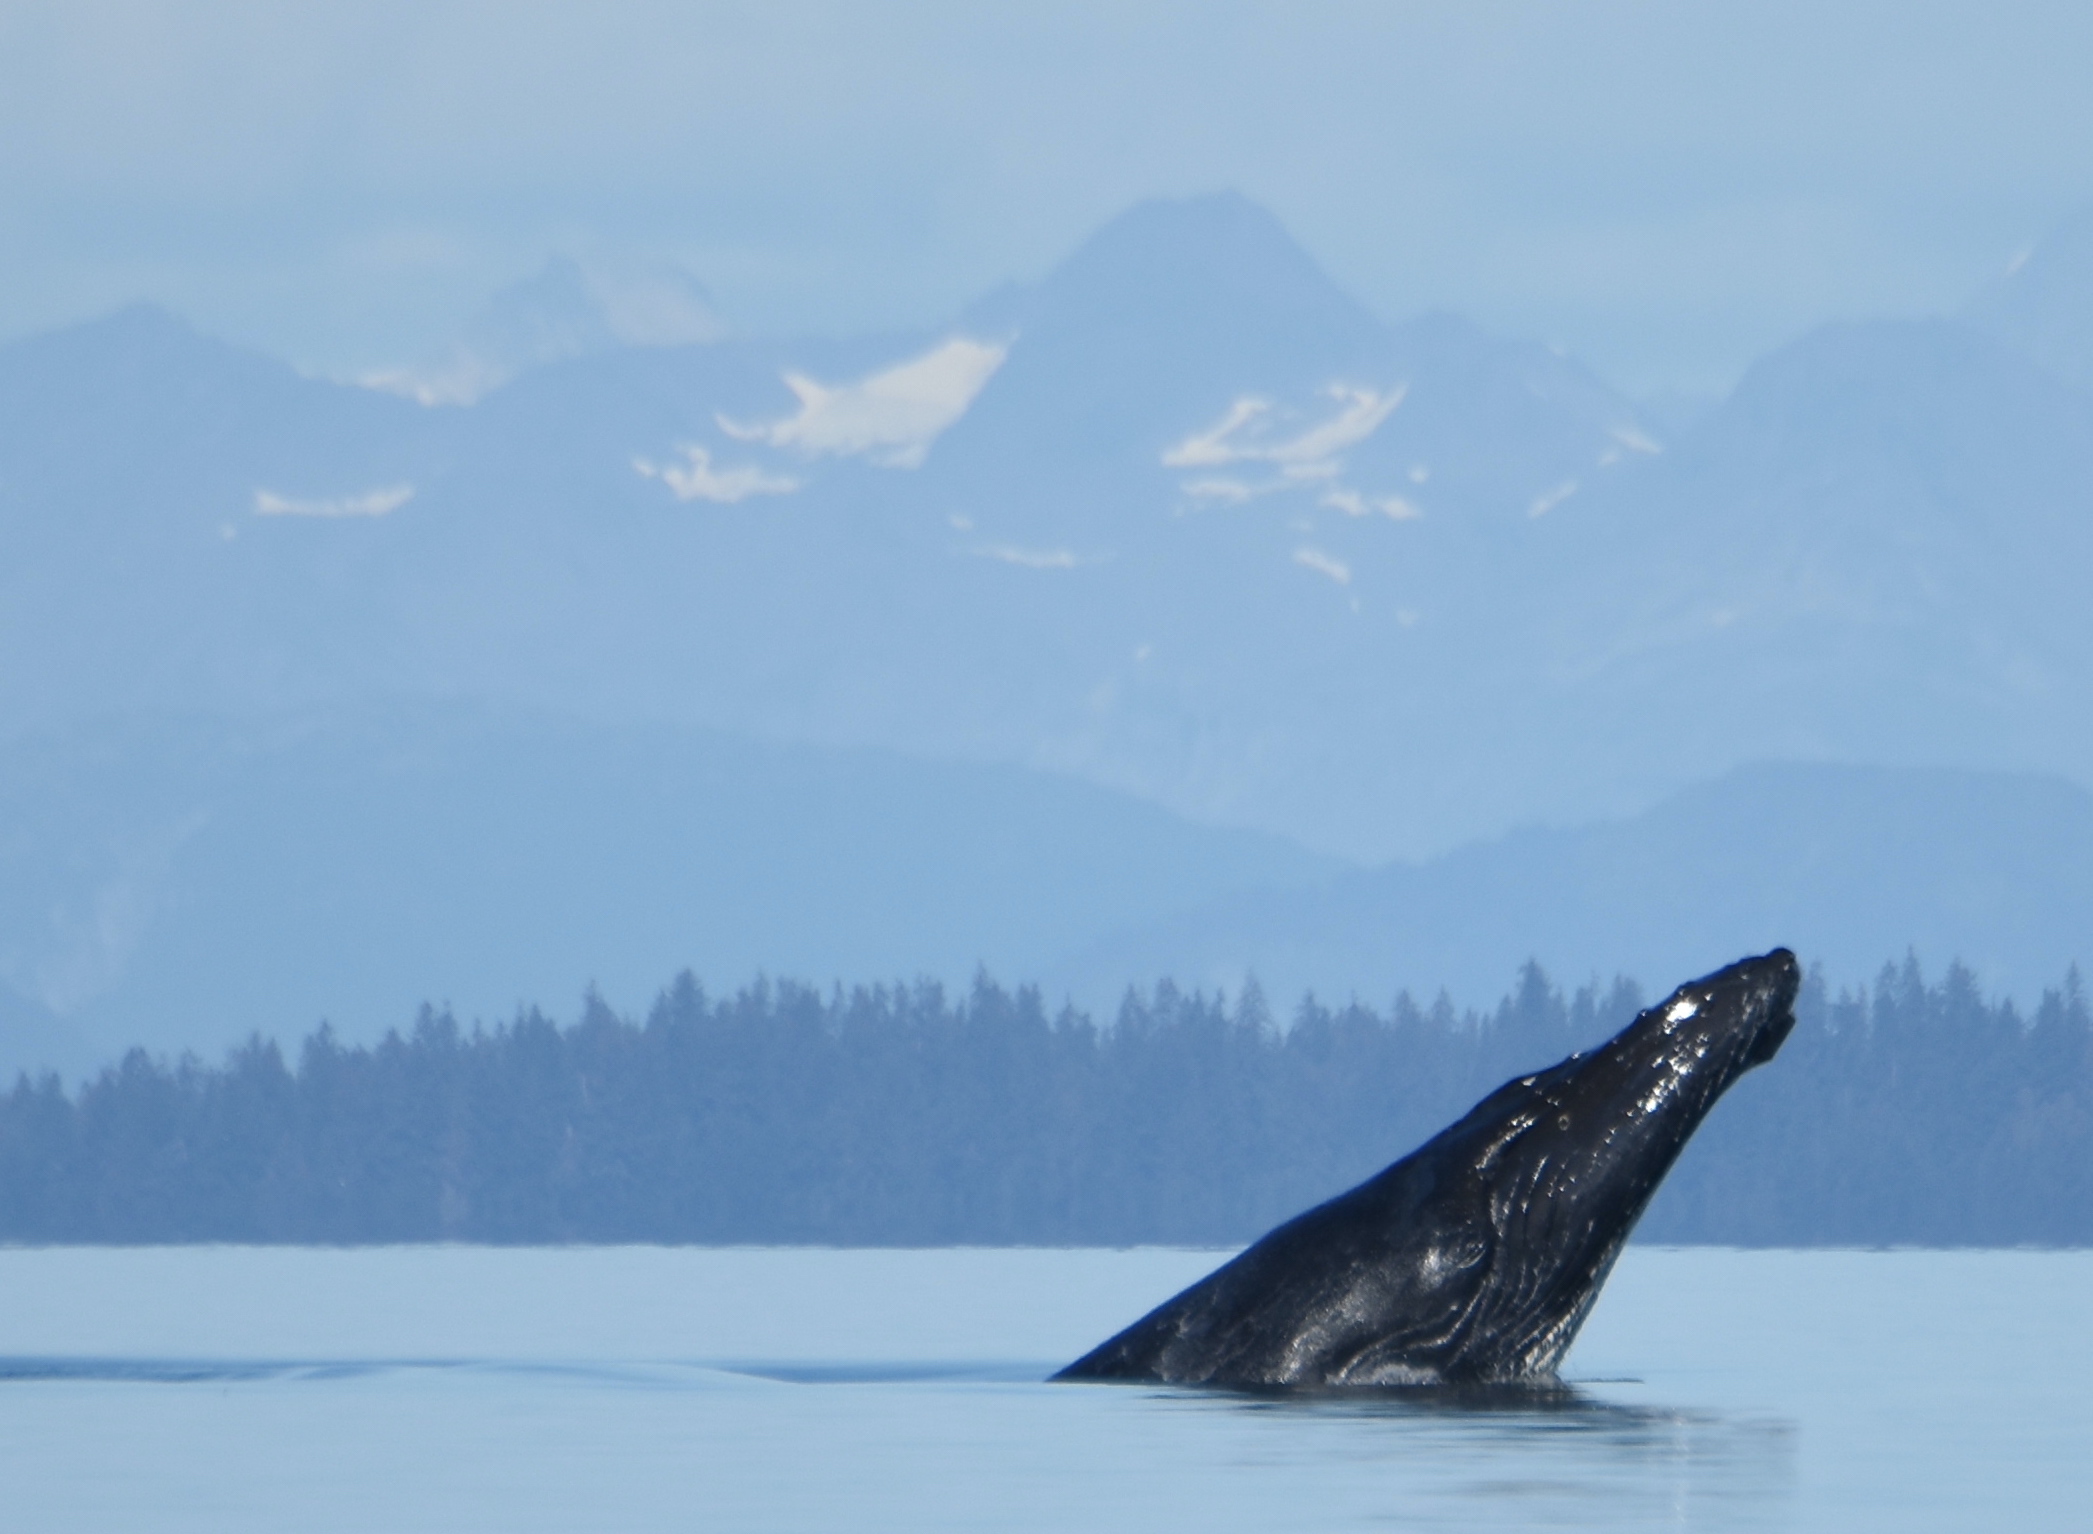 A humpback whale's head emerges from a smooth ocean surface. In the background is a shoreline of evergreens, behind which rise mountains with a few snowfields on their upper slopes.